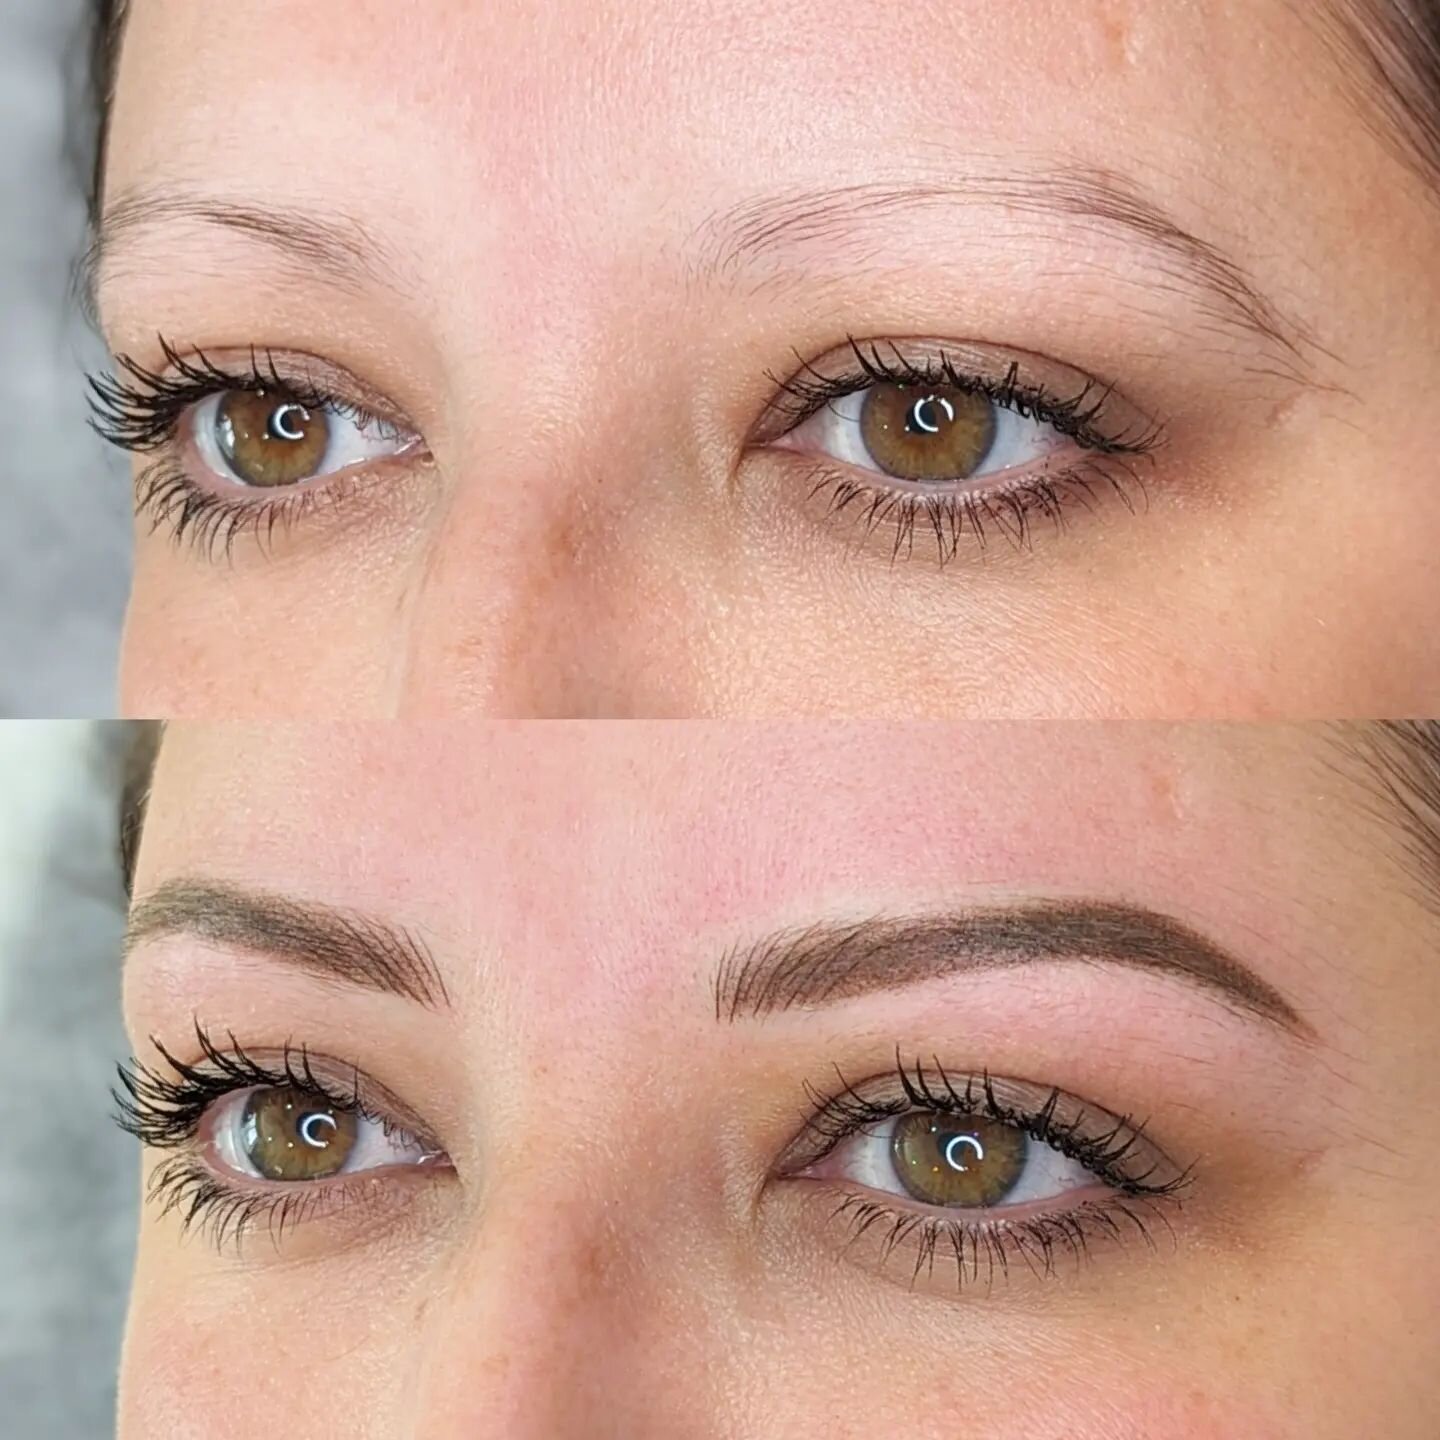 Gorgeous combination brows 😍

For enquiries, availability or to book please email me by clicking on website link in my bio.

#microblading #eyebrows #browtattoo #wynyard #permanentmakeup #powderbrows #ombr&eacute;brows #combinationbrows #newbrows